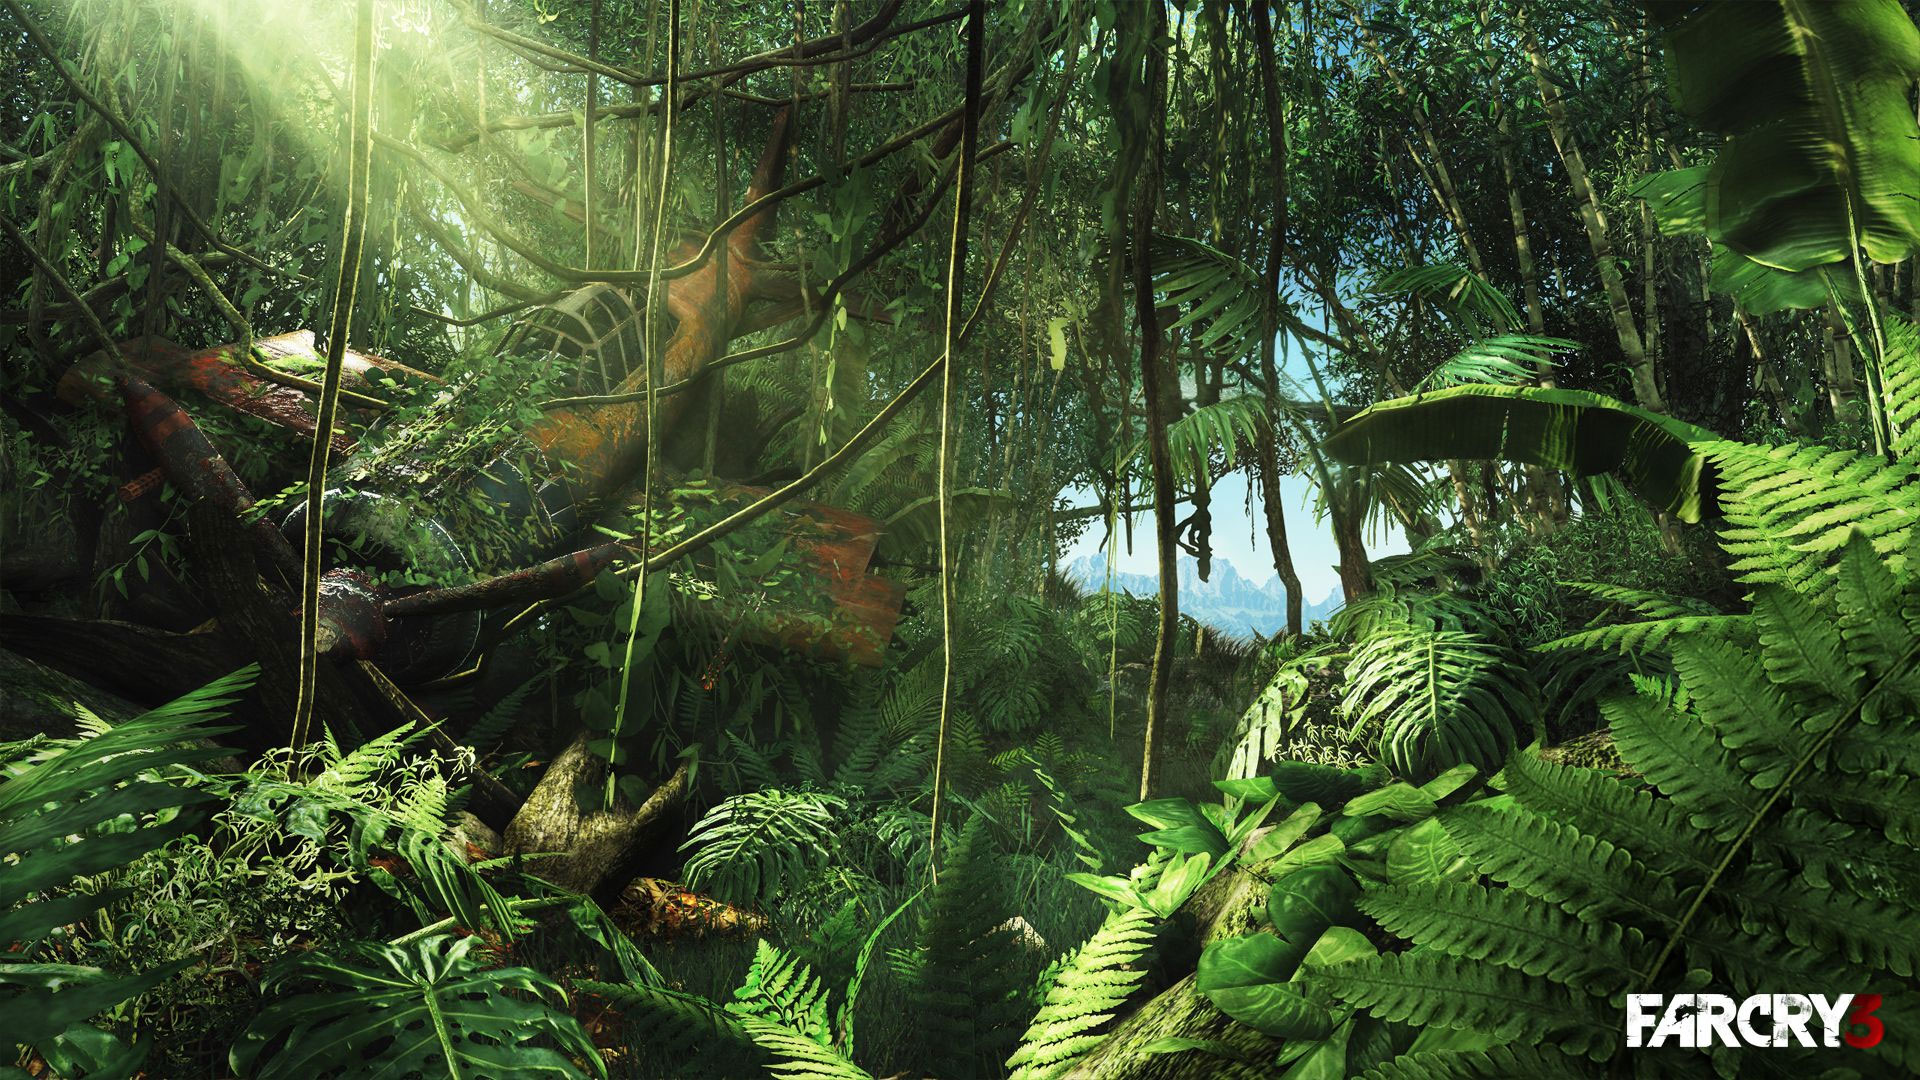 Far Cry 3 Wallpapers in HD Page 2 1920x1080